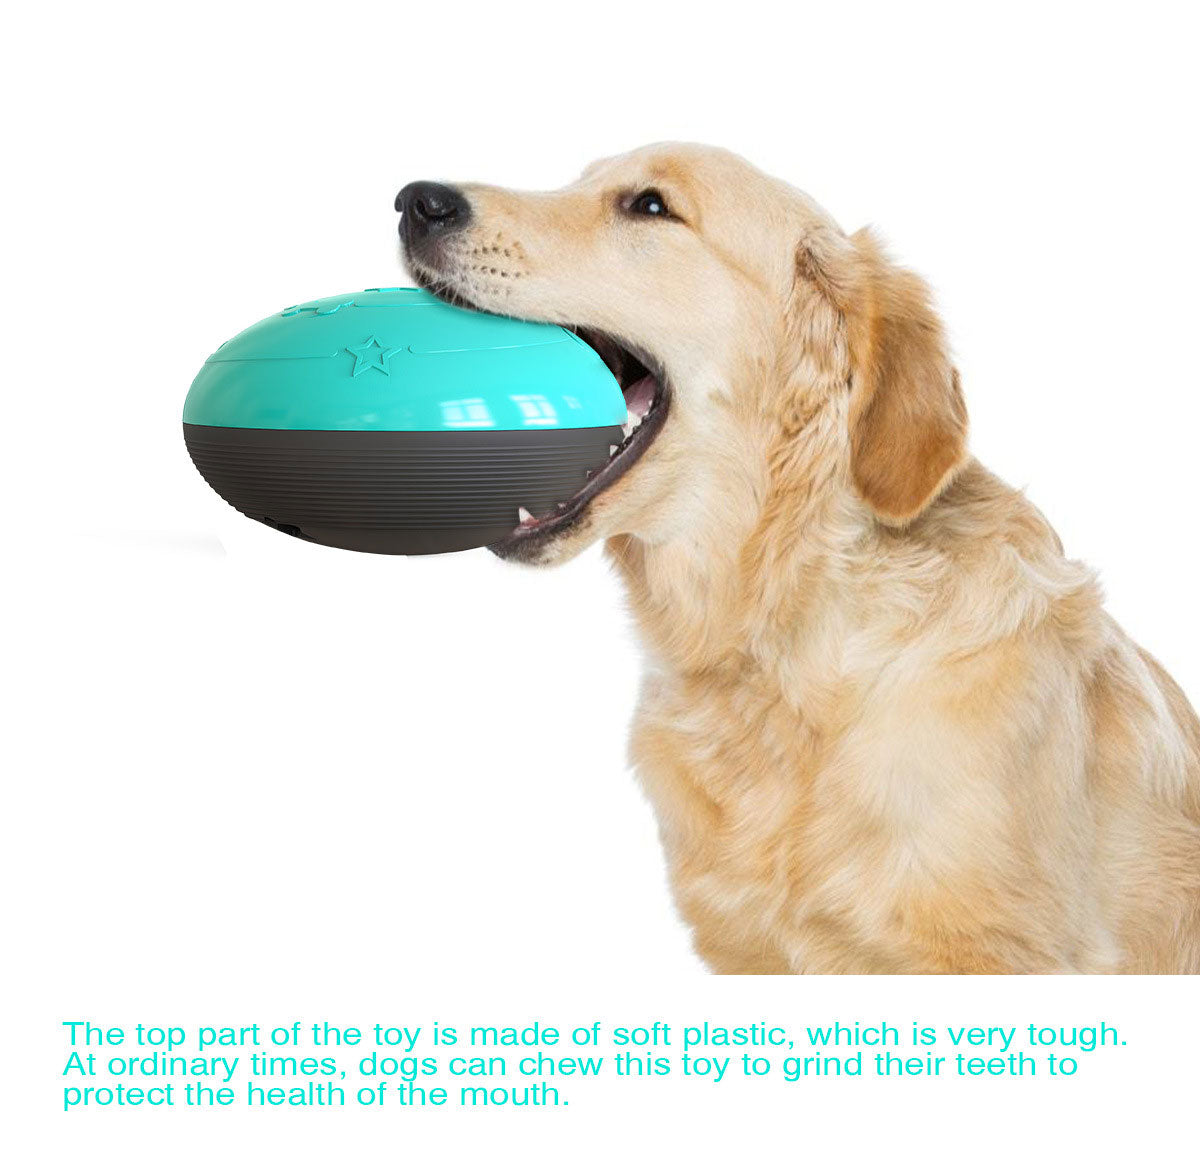 https://cdn.shopifycdn.net/s/files/1/0065/3629/8594/files/Squeaky_Dog_Toys_Interactive_Fun_Dog_Food_Bowls_Puzzle_Feeder_for_Puppies-5.jpg?v=1596009963